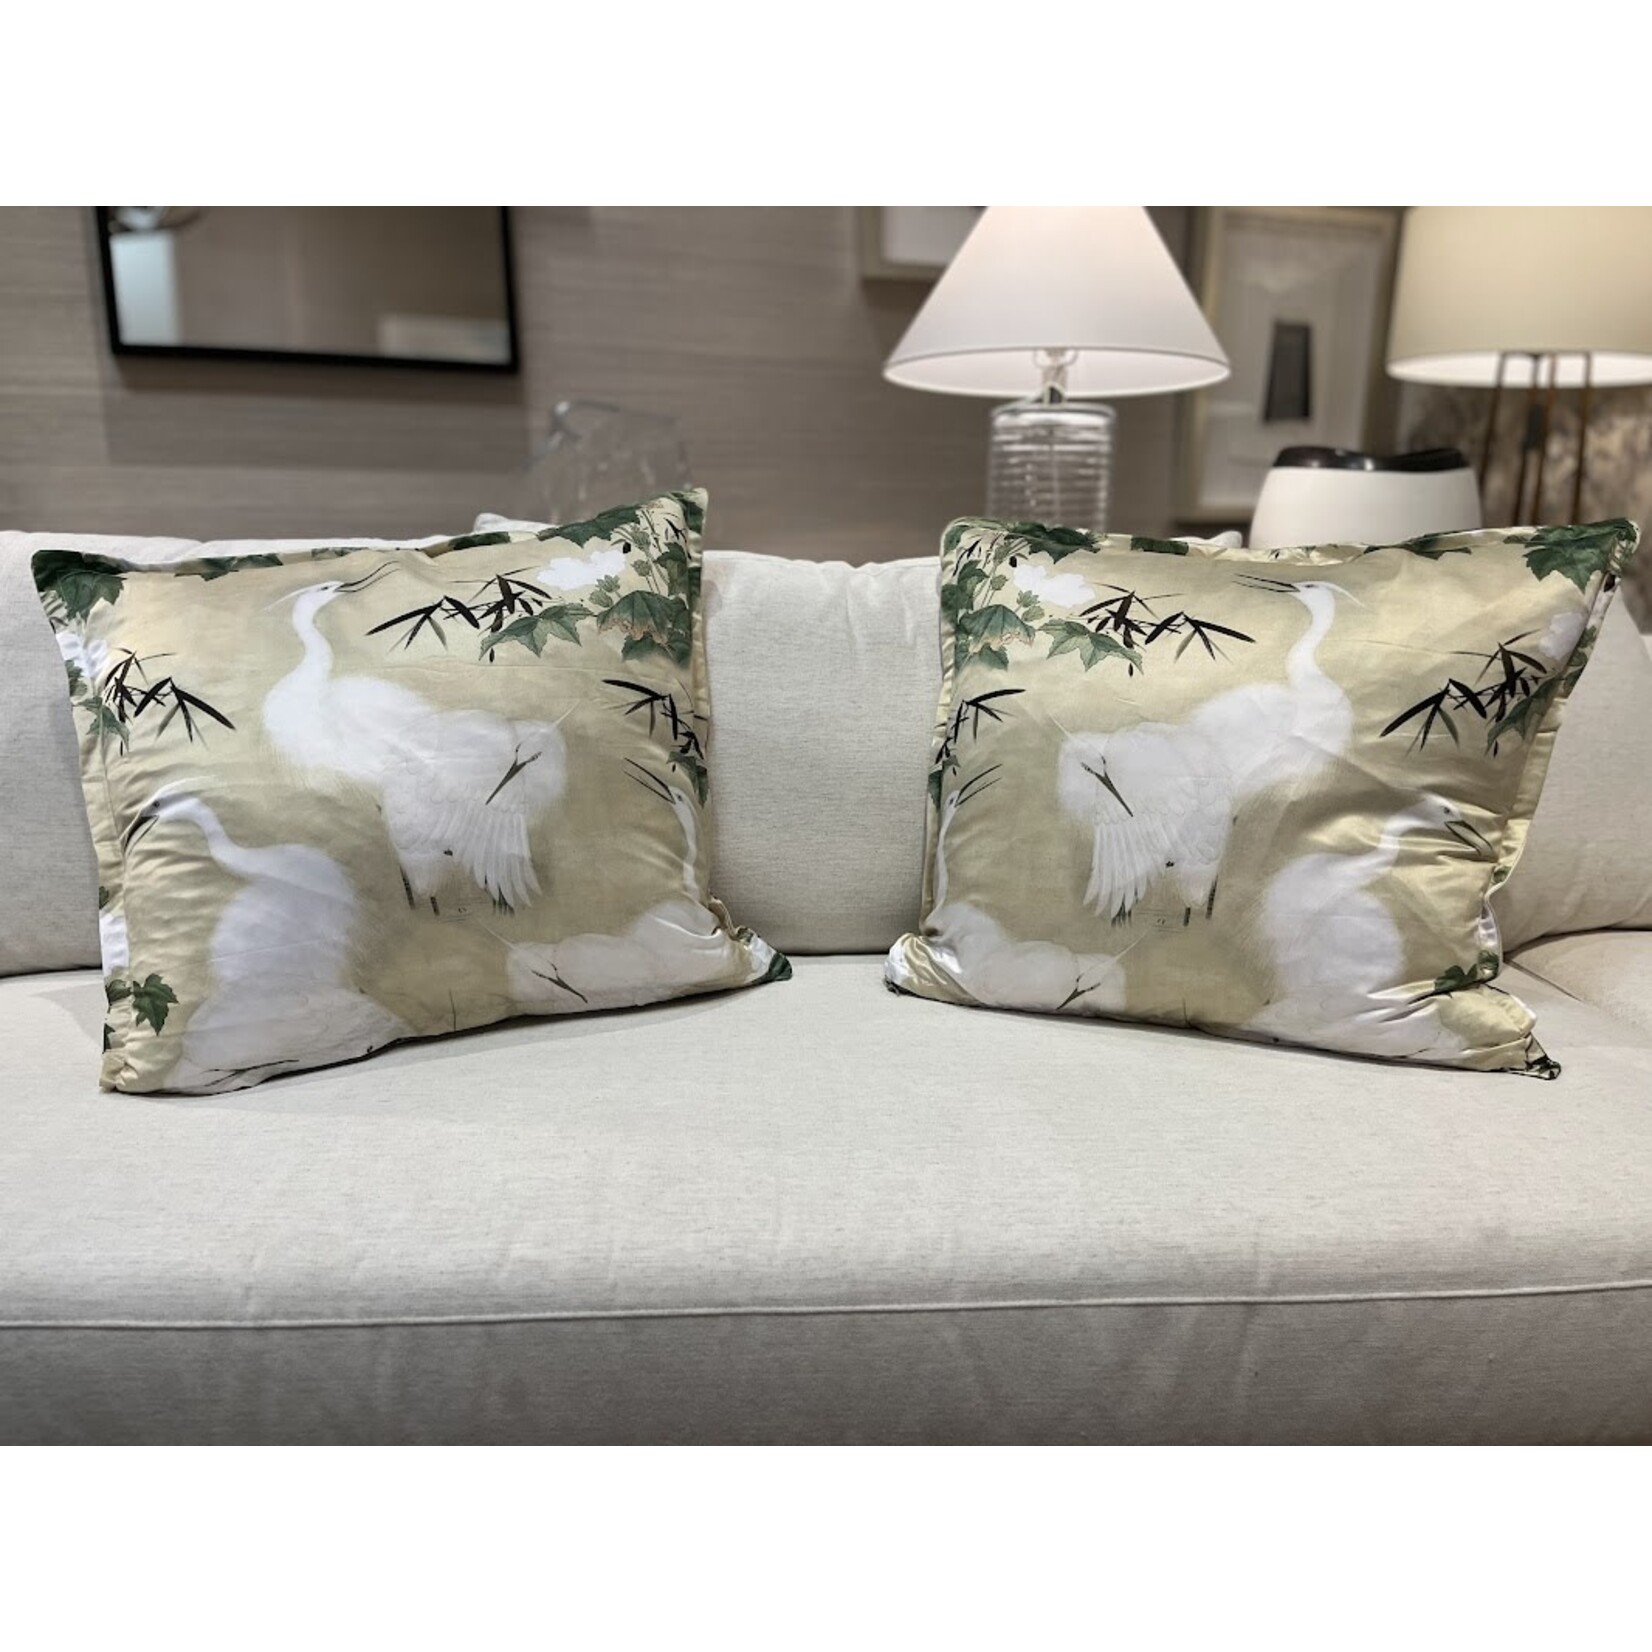 Poetic Pillow White Egret with Flange Pillow 26x26